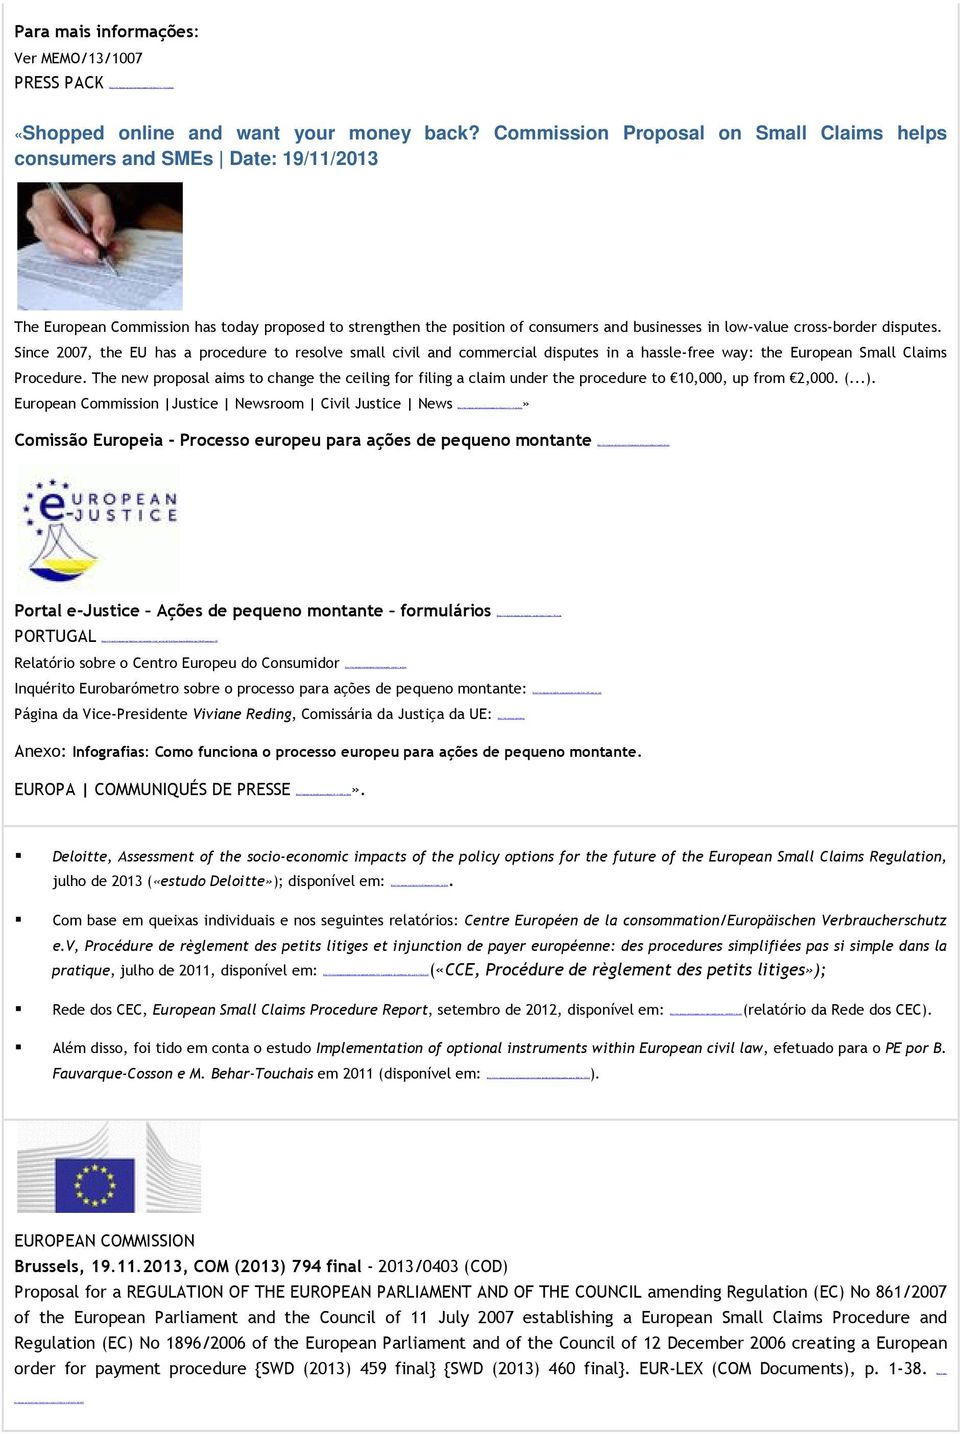 11 July 2007 establishing a European Small Claims Procedure and Regulation (EC) No 1896/2006 of the European Parliament and of the Council of 12 December 2006 creating a European order for payment